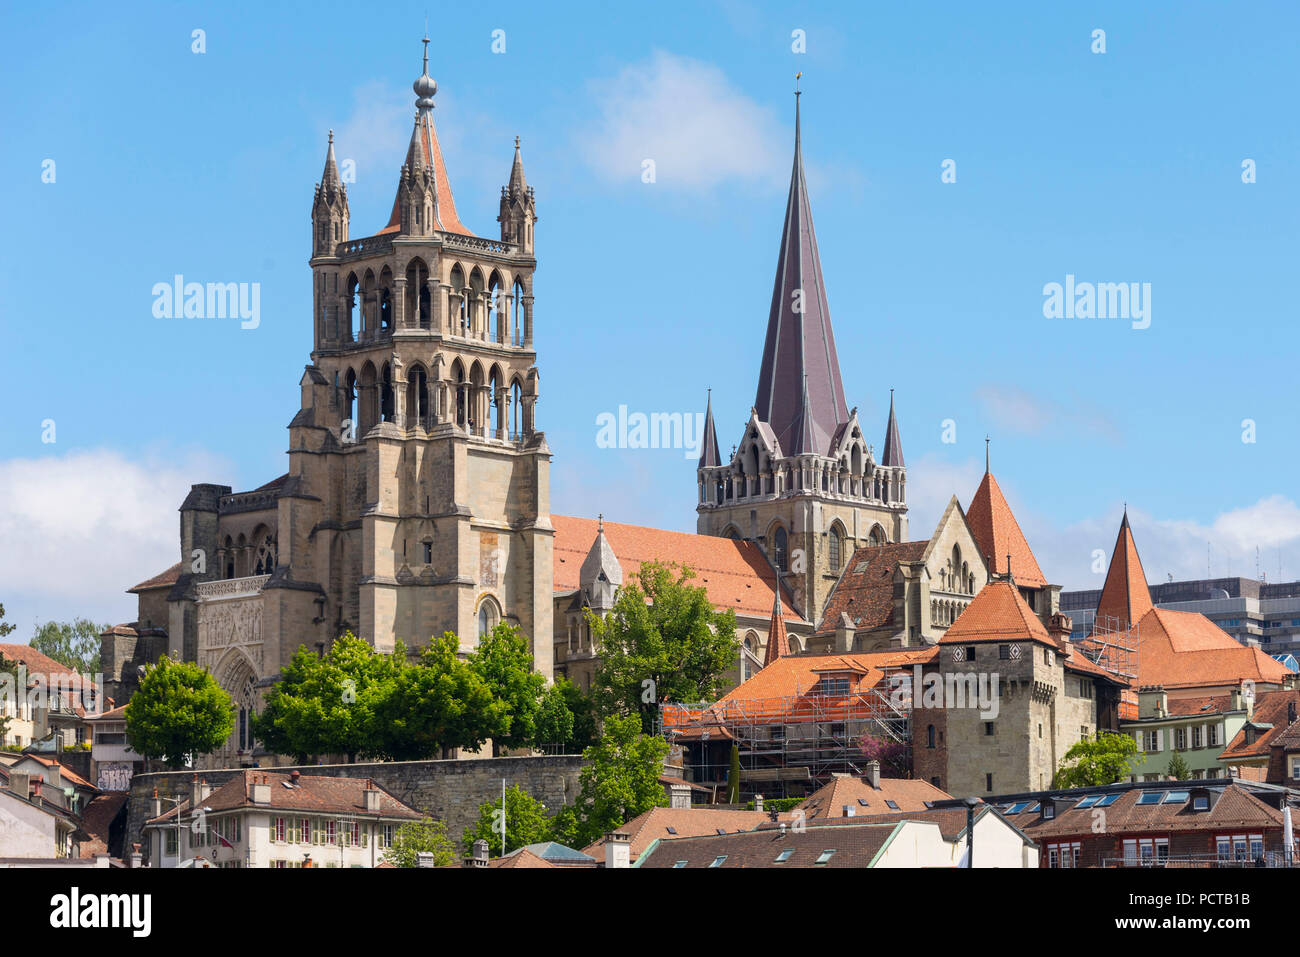 View of Notre Dame Cathedral and old town, Place de la Cathédrale, Lausanne, Canton of Vaud, Western Switzerland, Switzerland Stock Photo